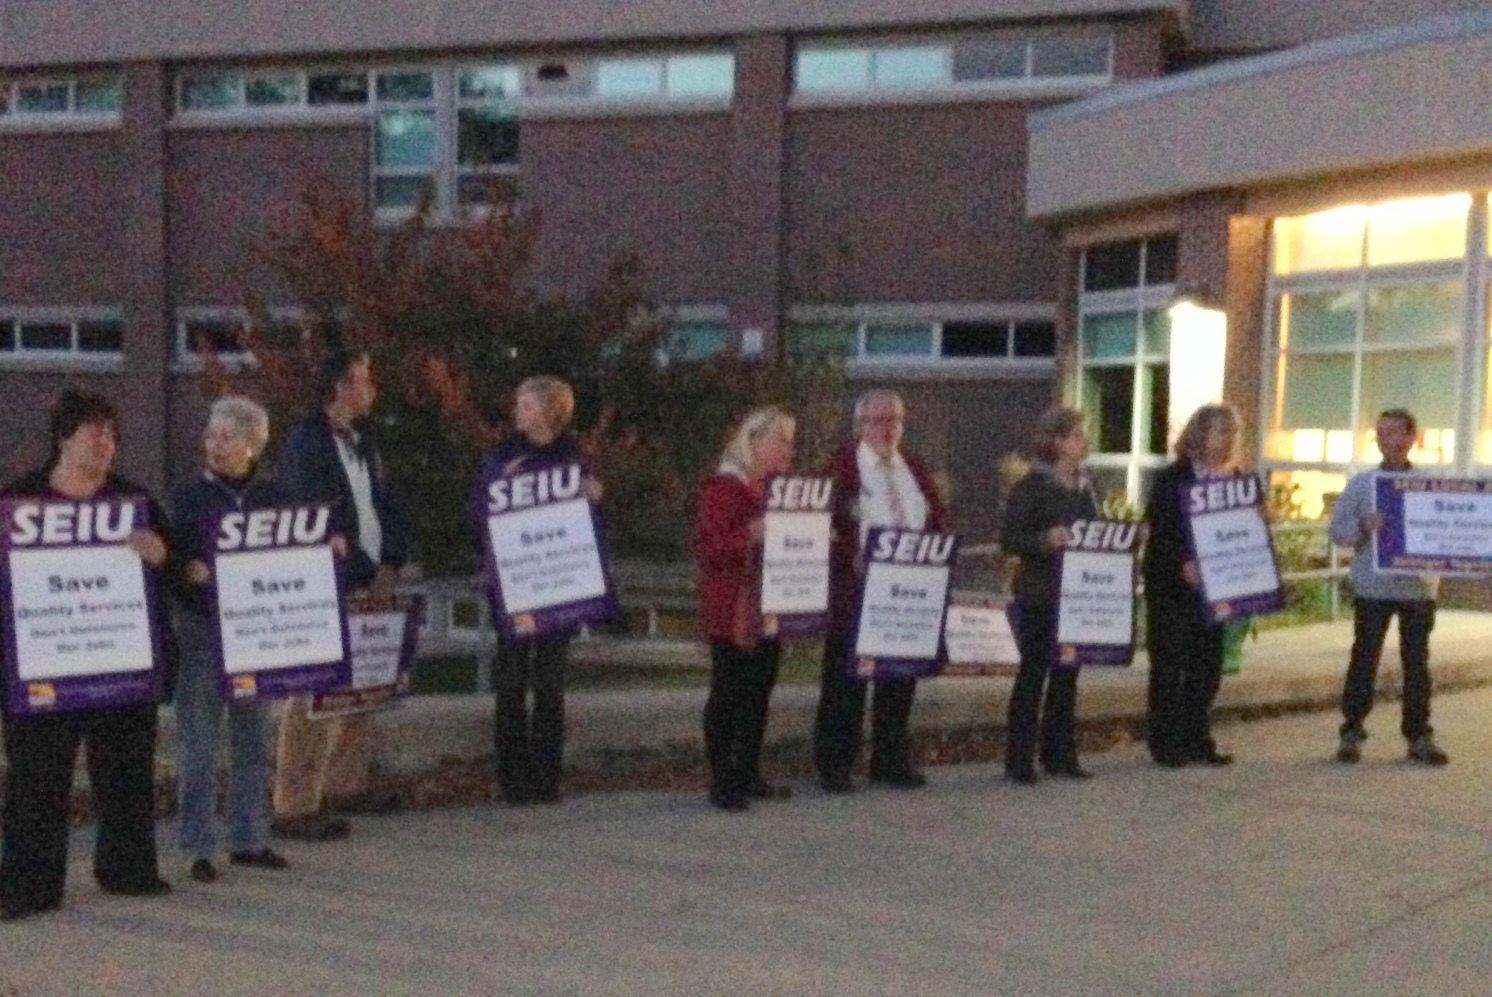 Members holding signs at Westborough town meeting